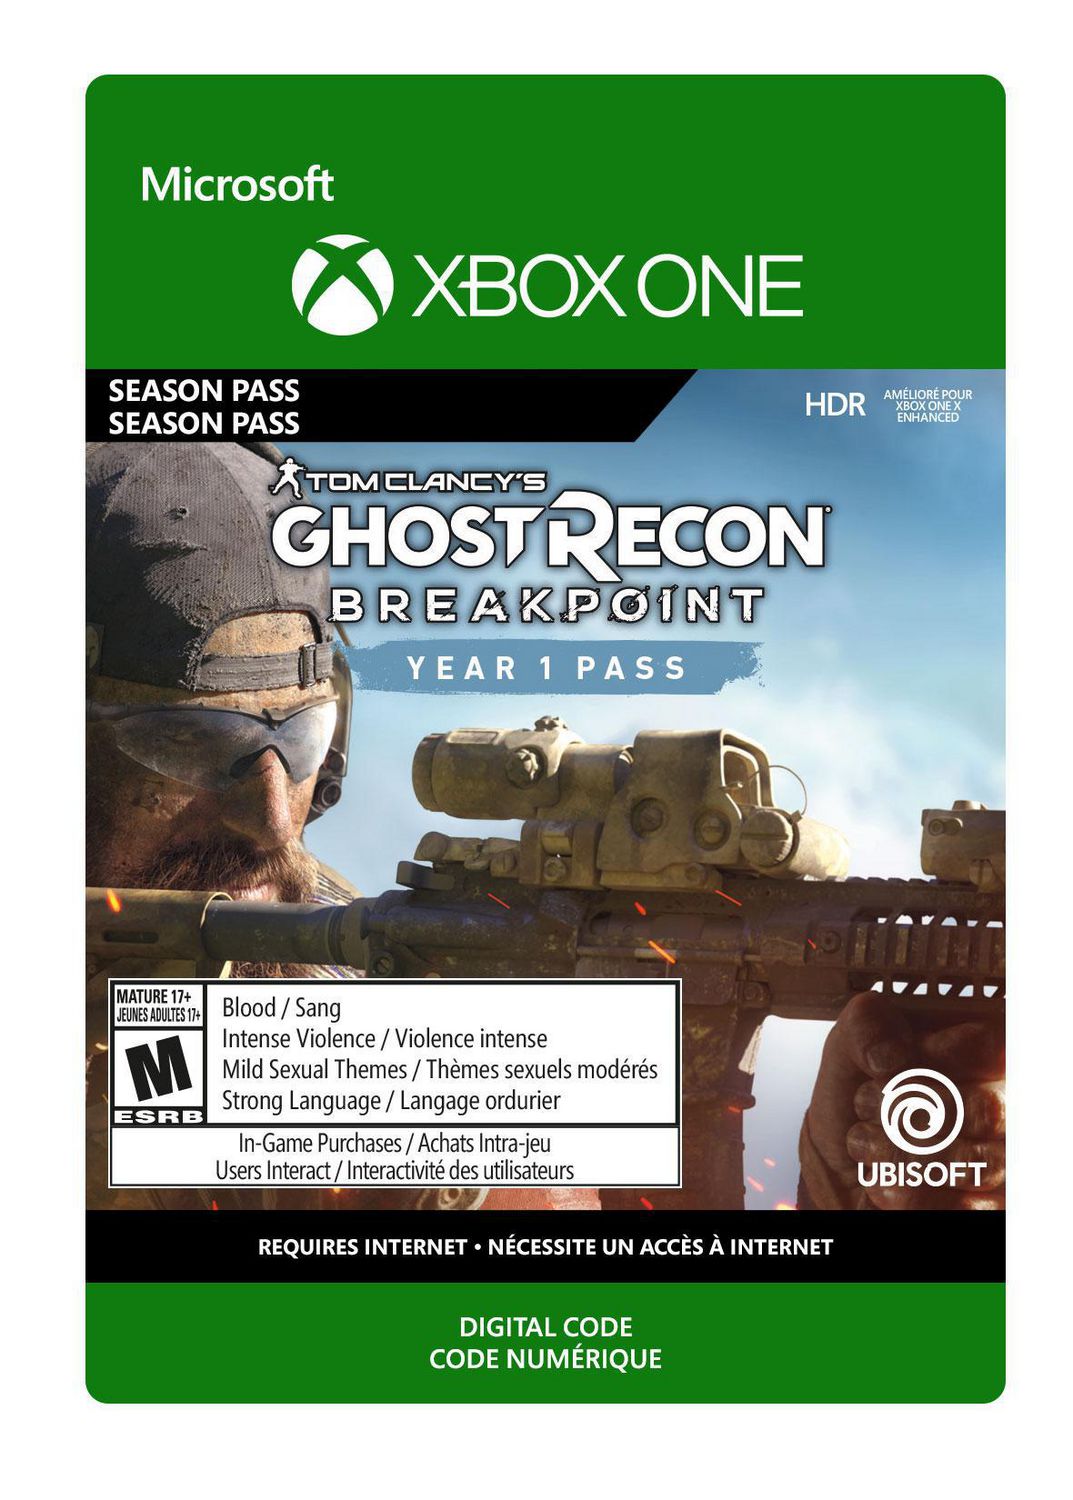 ghost recon breakpoint xbox one digital